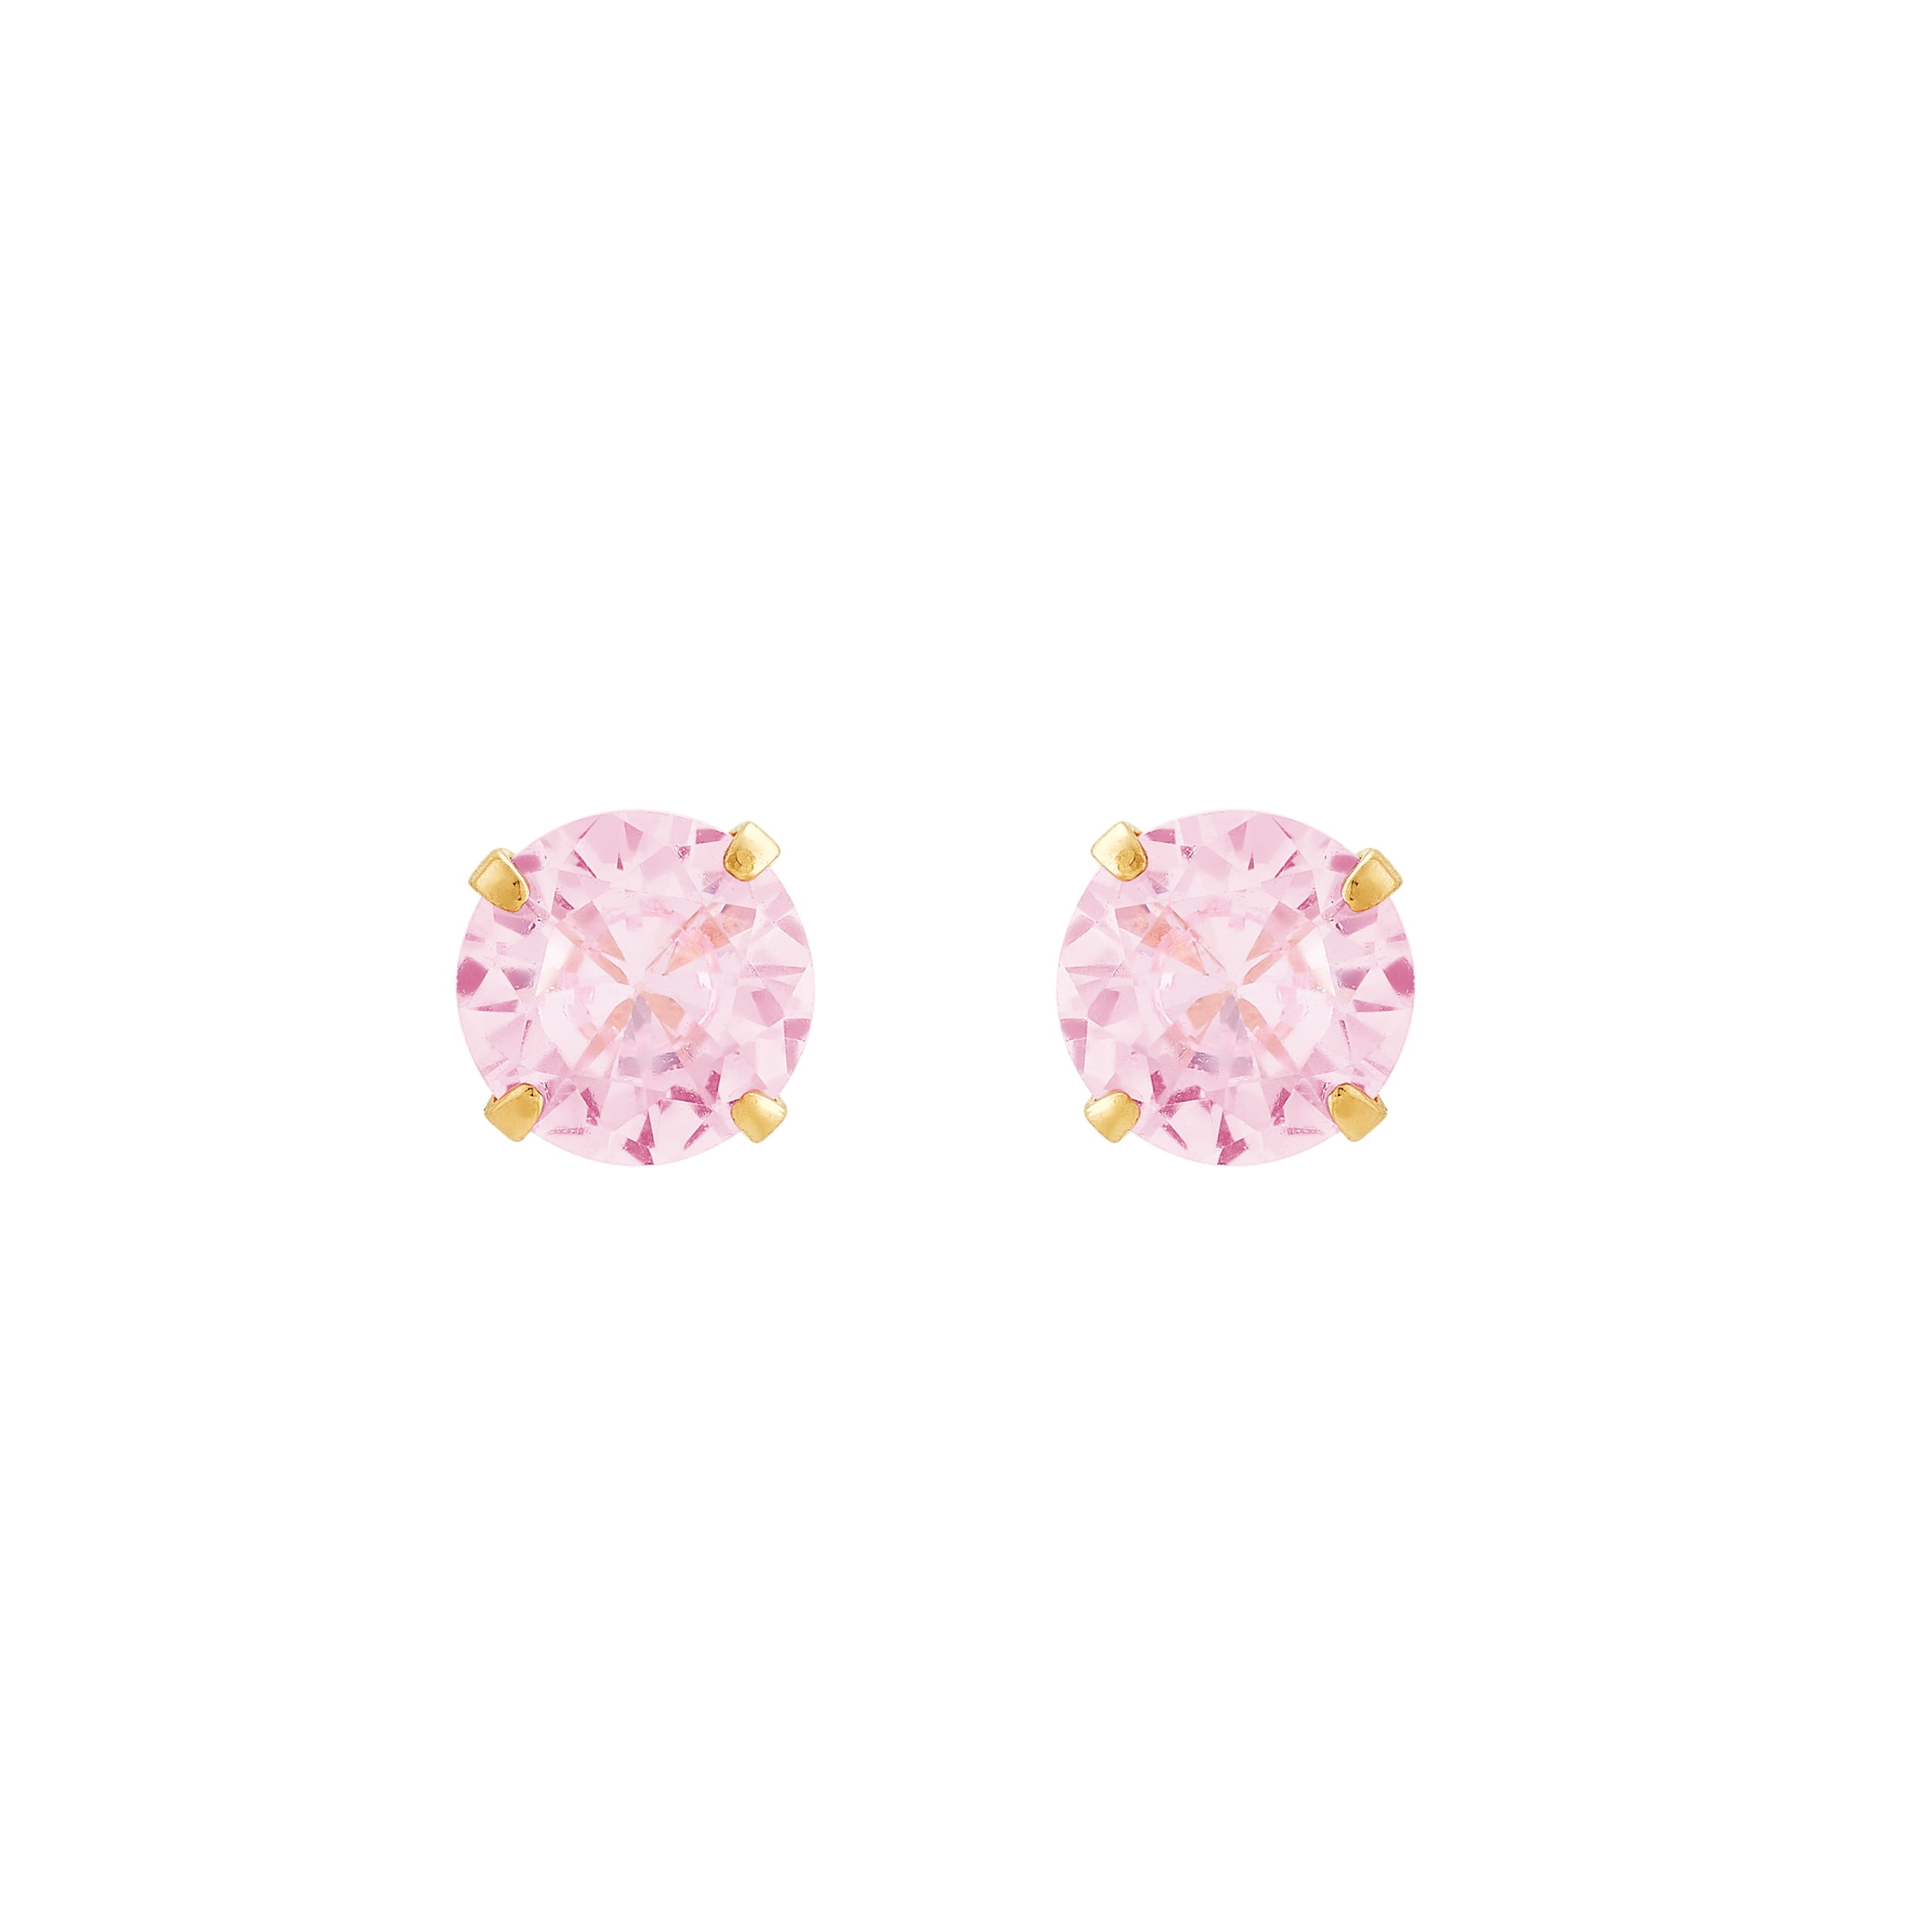 Brilliance Fine Jewelry Pink Cubic Zirconia Hollow Ball Back Studs in 14K Yellow Gold